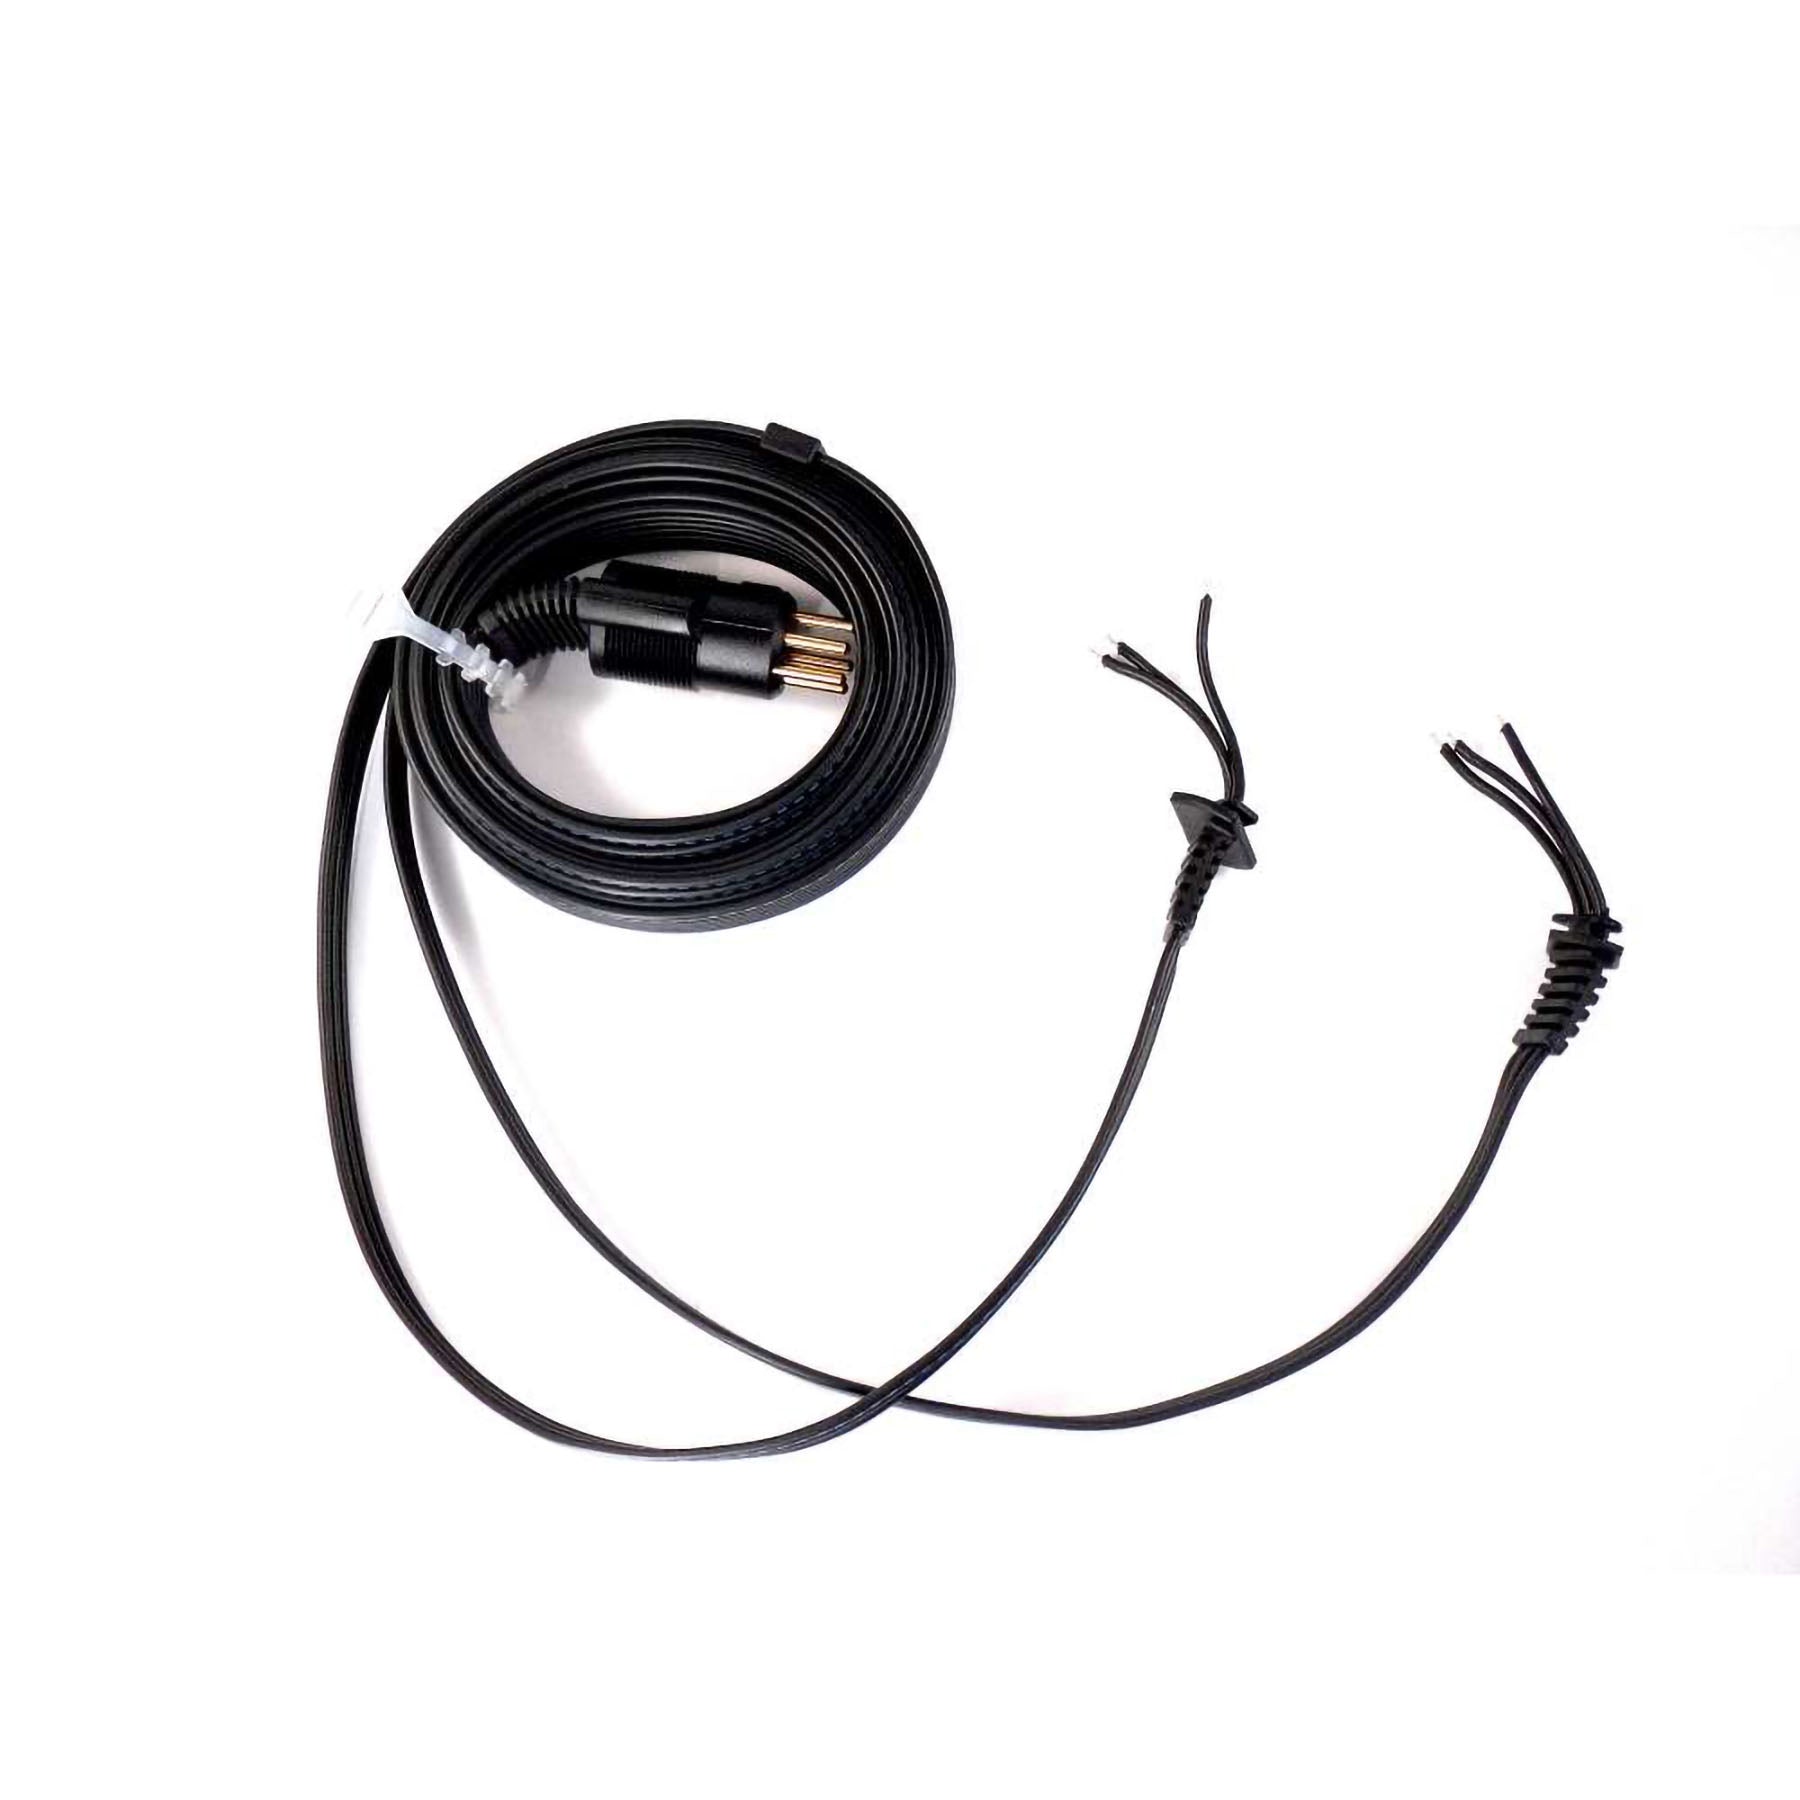 Stax Headphone cable for SR-L300